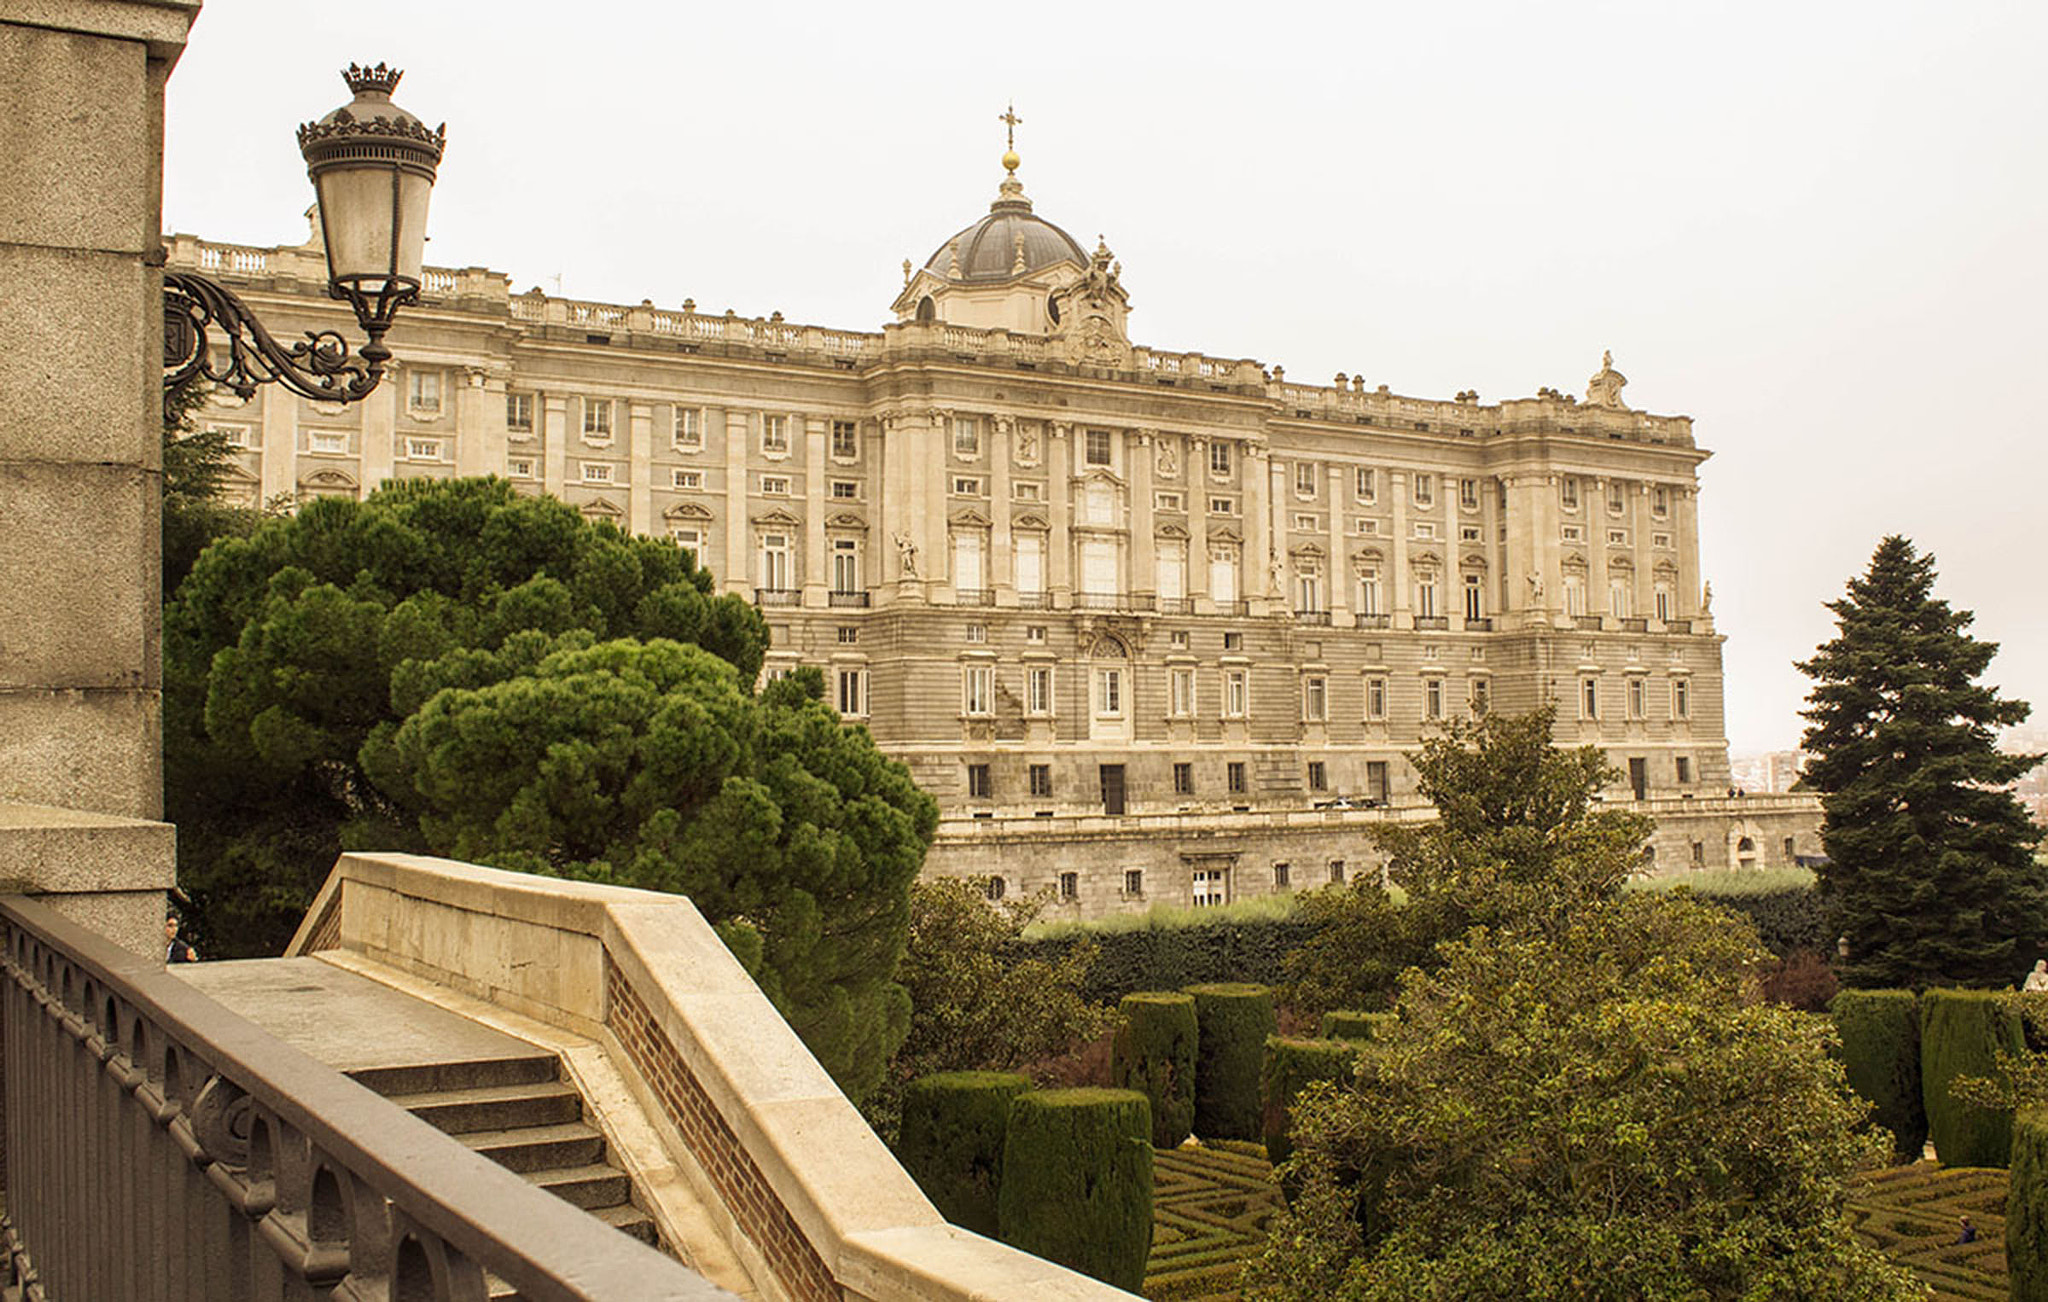 View of the Royal Palace in Madrid